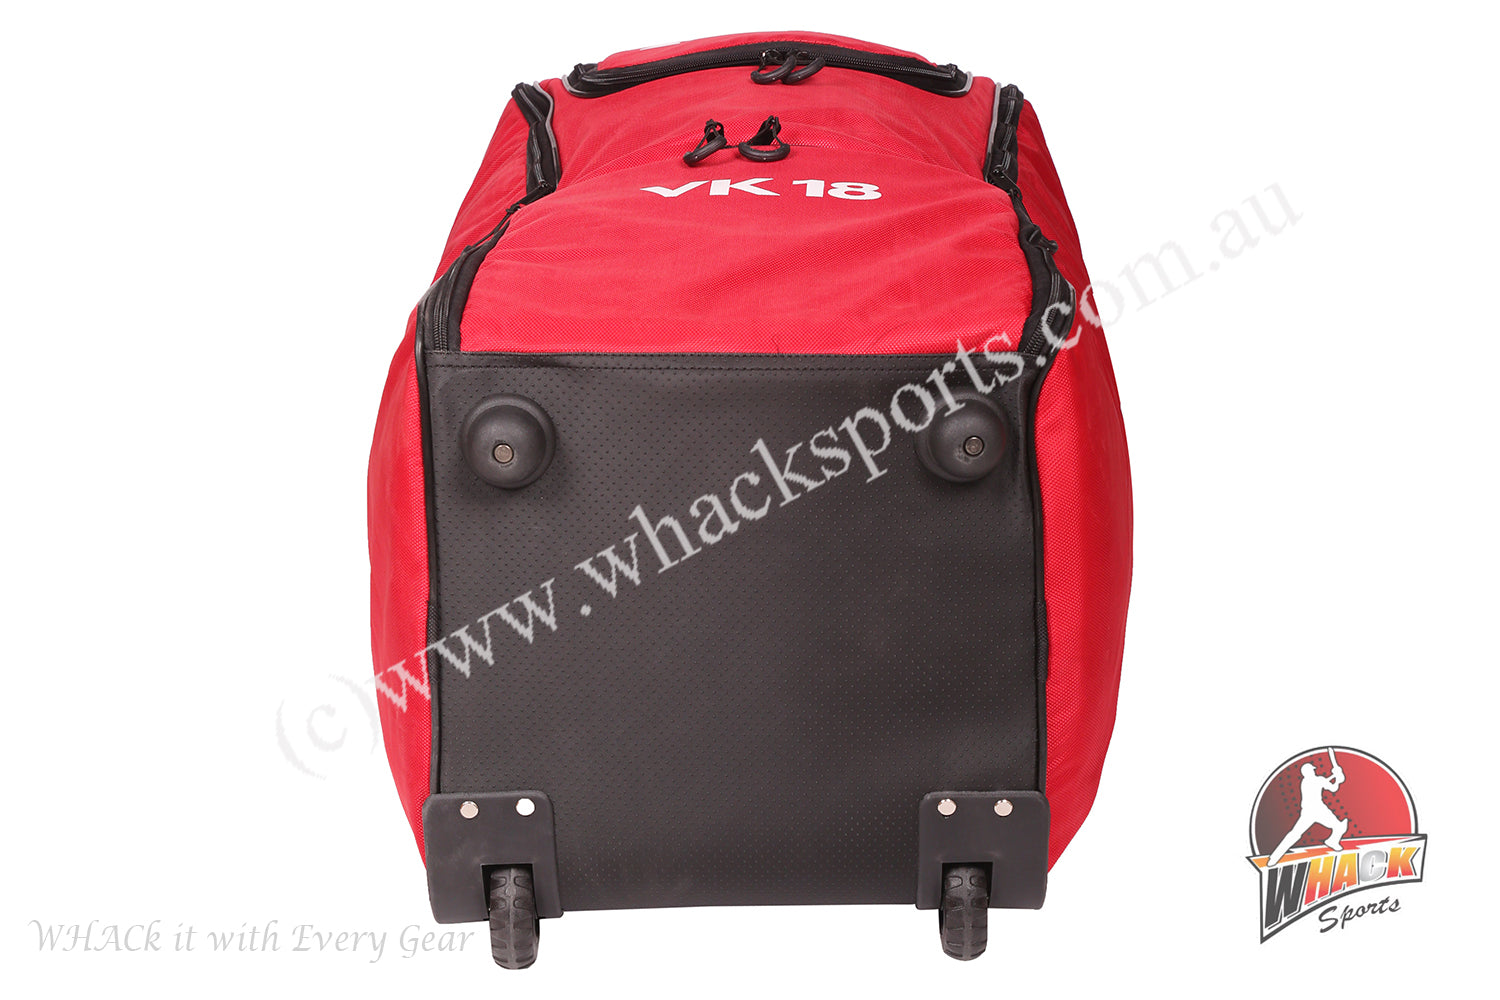 Buy MRF Cricket KITBAG VK-18 LE Online at Low Prices in India - Amazon.in